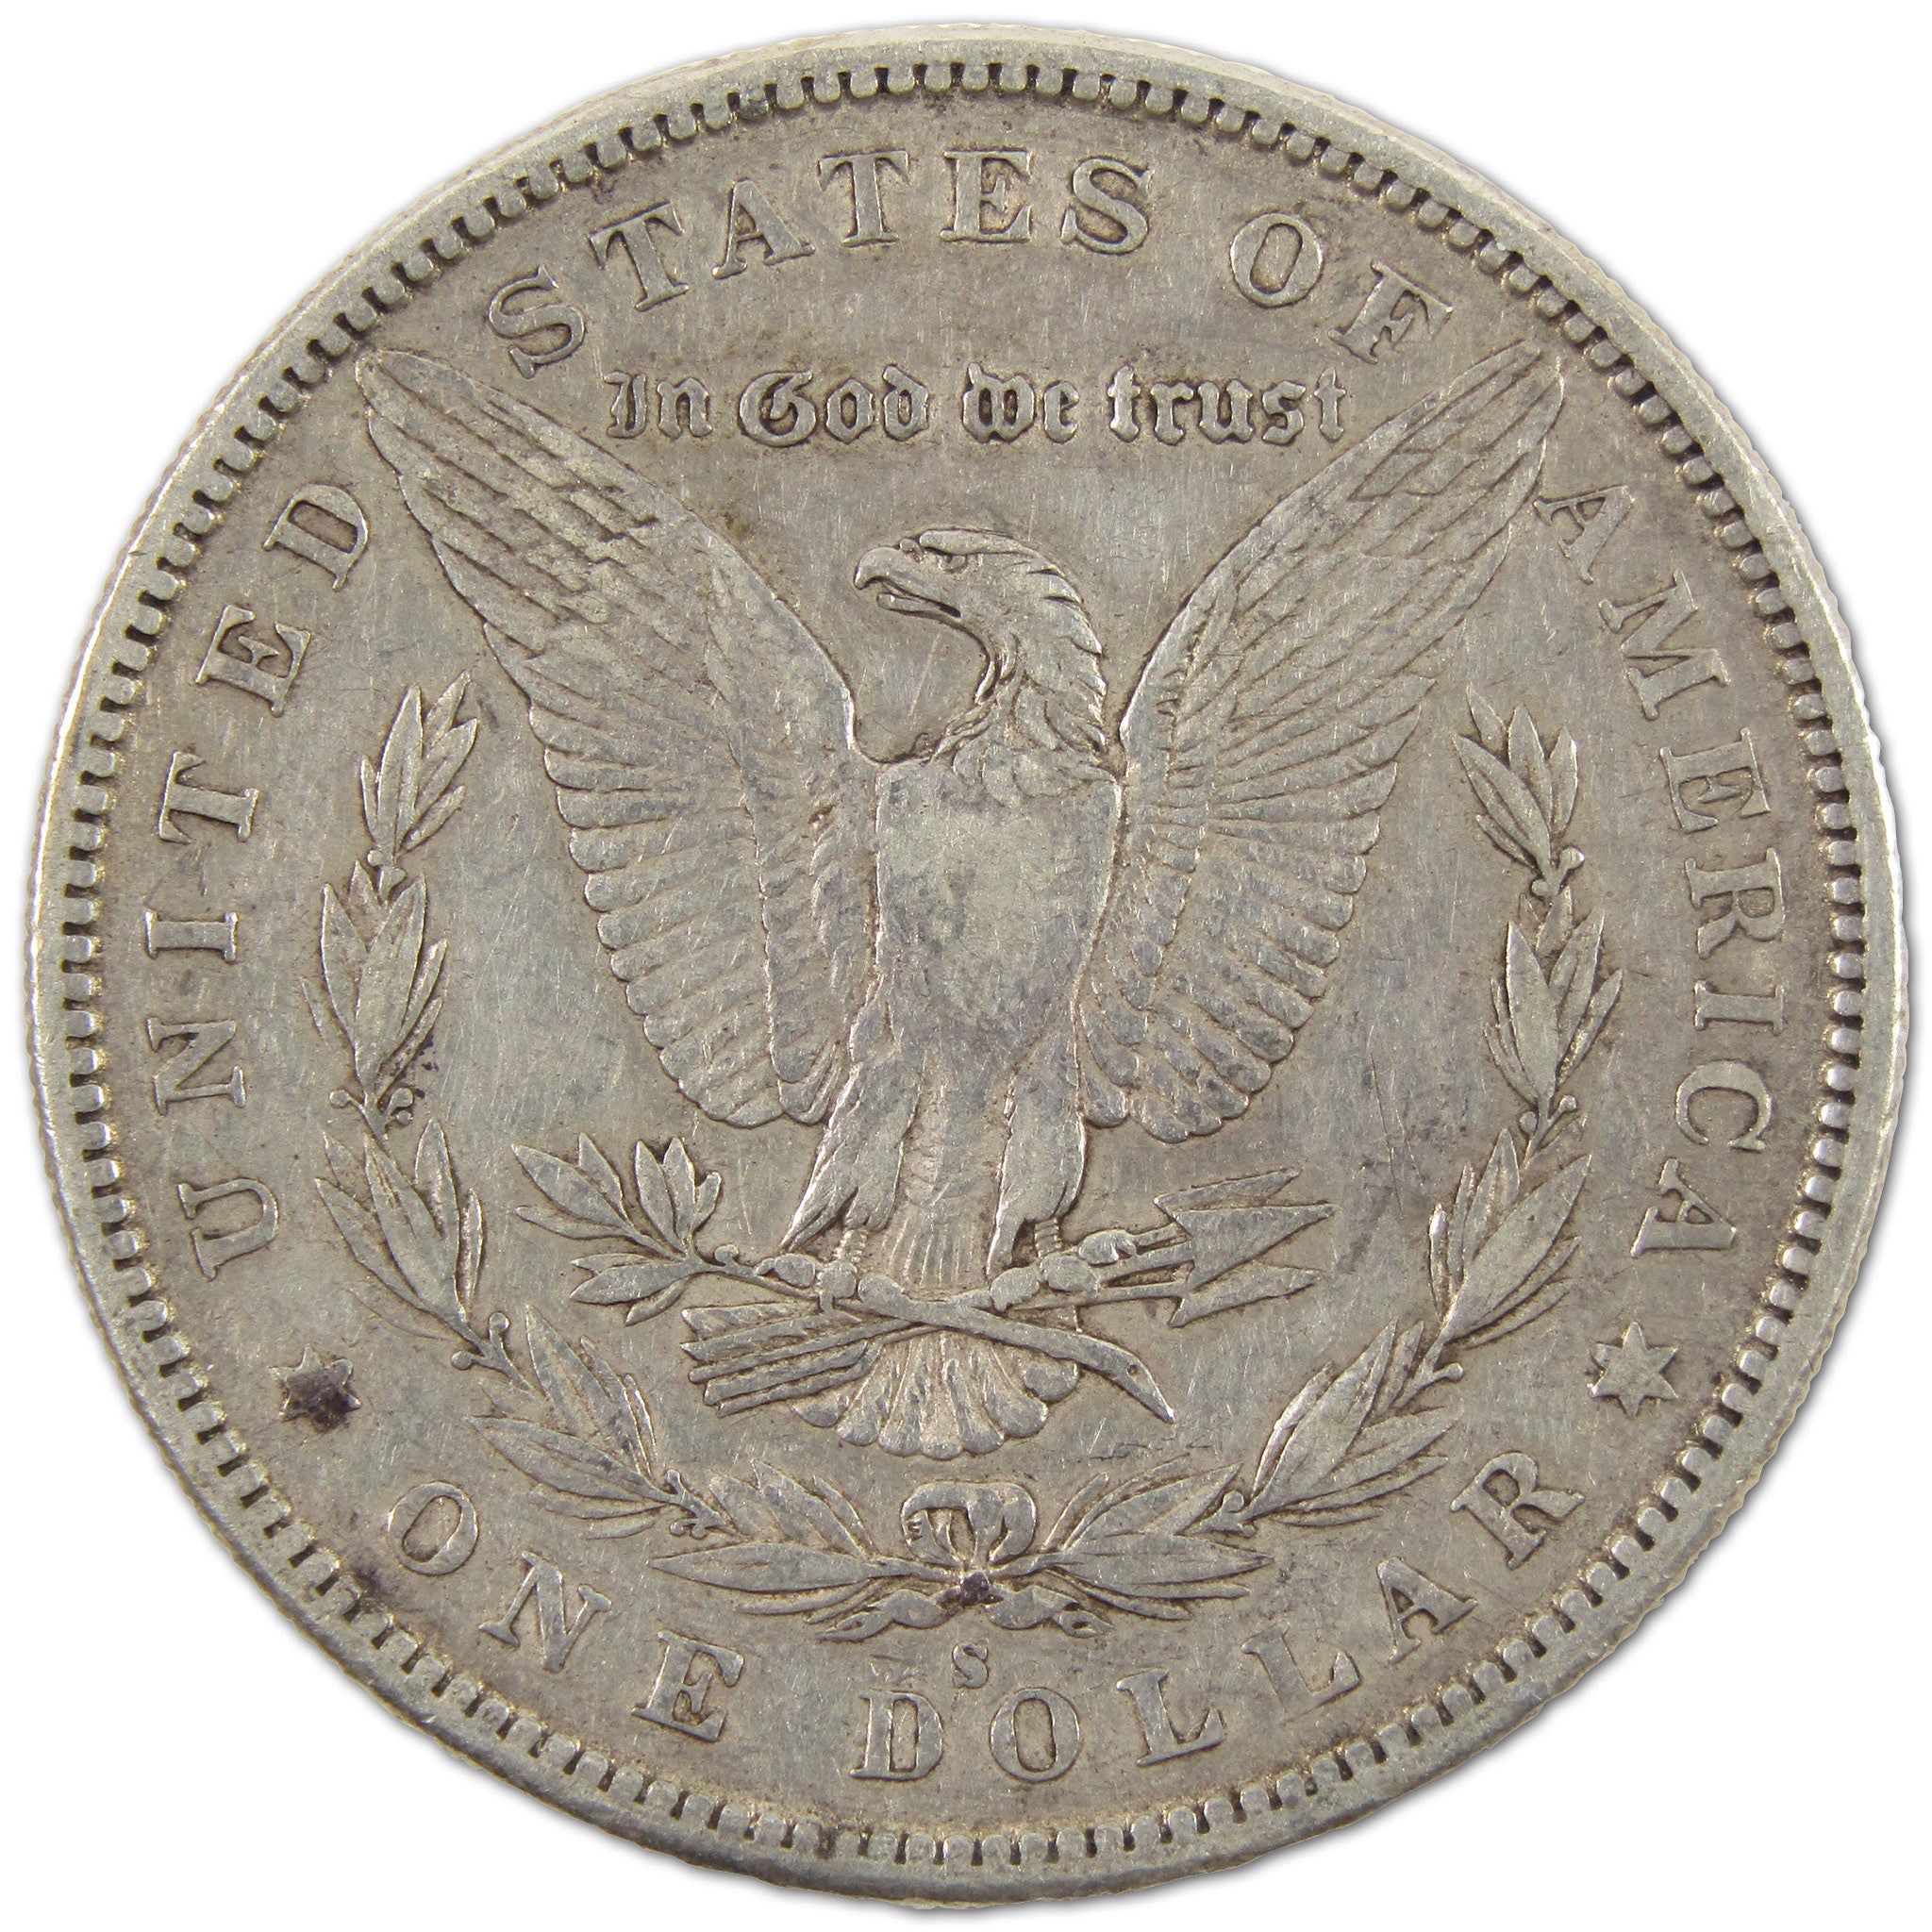 1883 S Morgan Dollar XF EF Extremely Fine Silver $1 Coin SKU:I10575 - Morgan coin - Morgan silver dollar - Morgan silver dollar for sale - Profile Coins &amp; Collectibles